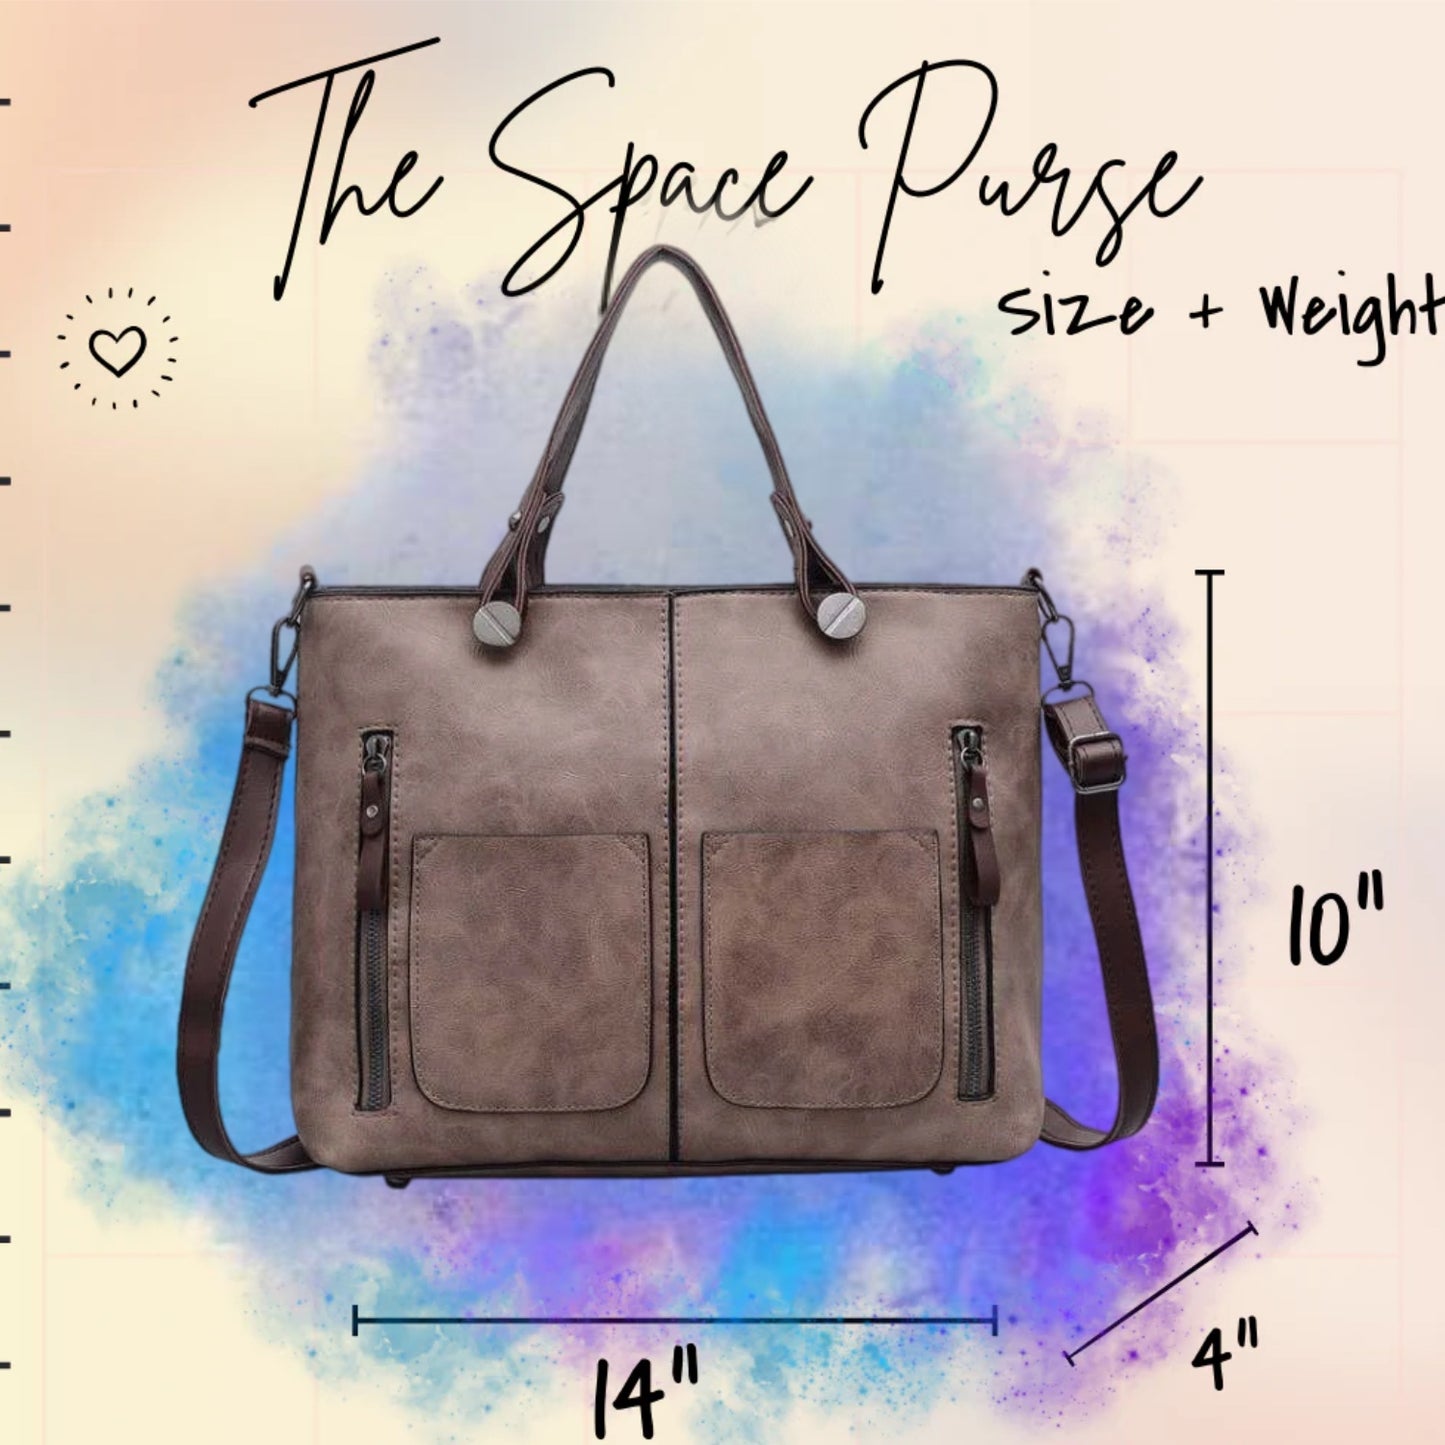 The Space For Everything Handbag in Brown